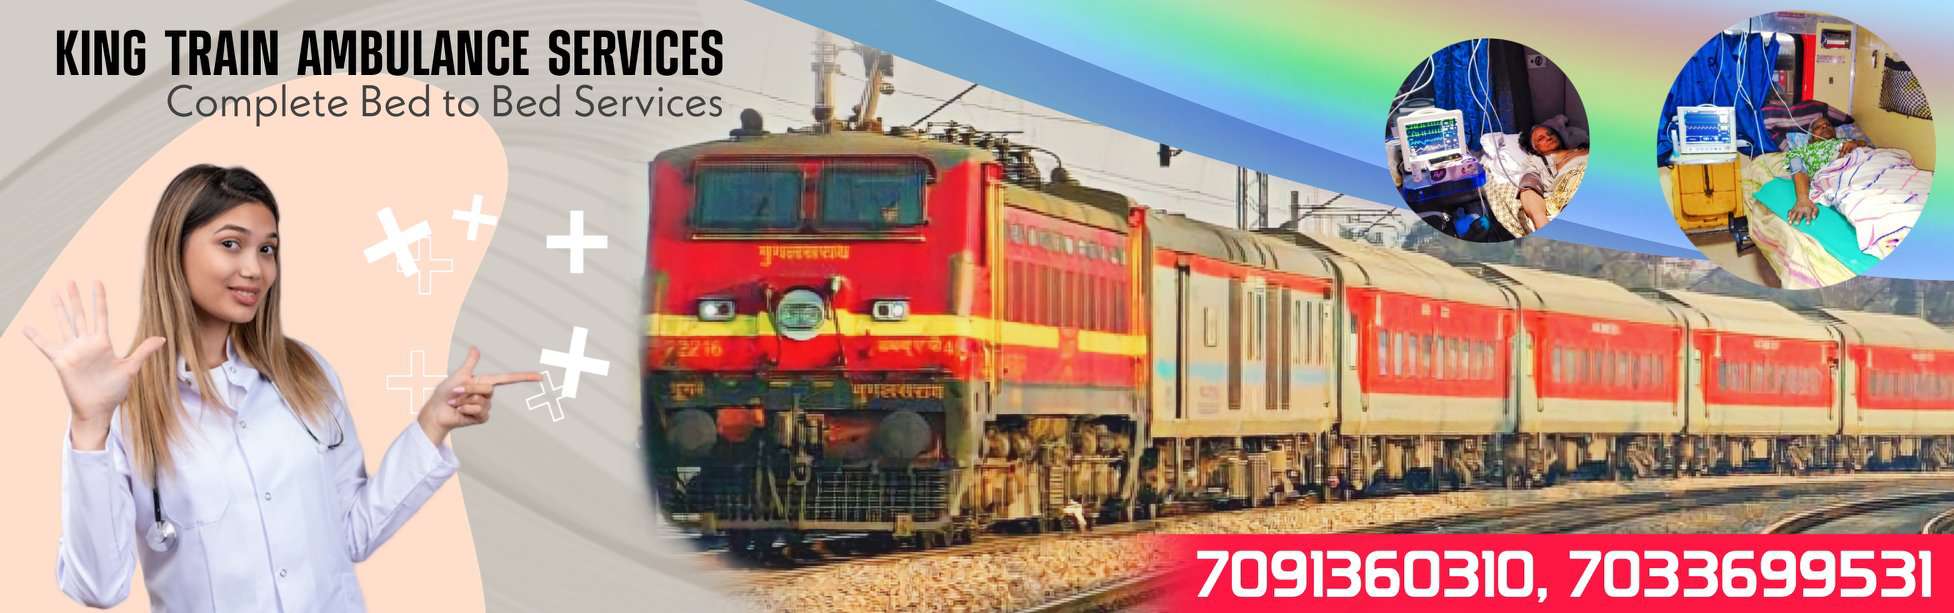 Hire Train Ambulance Services from Chennai At Lowest Cost